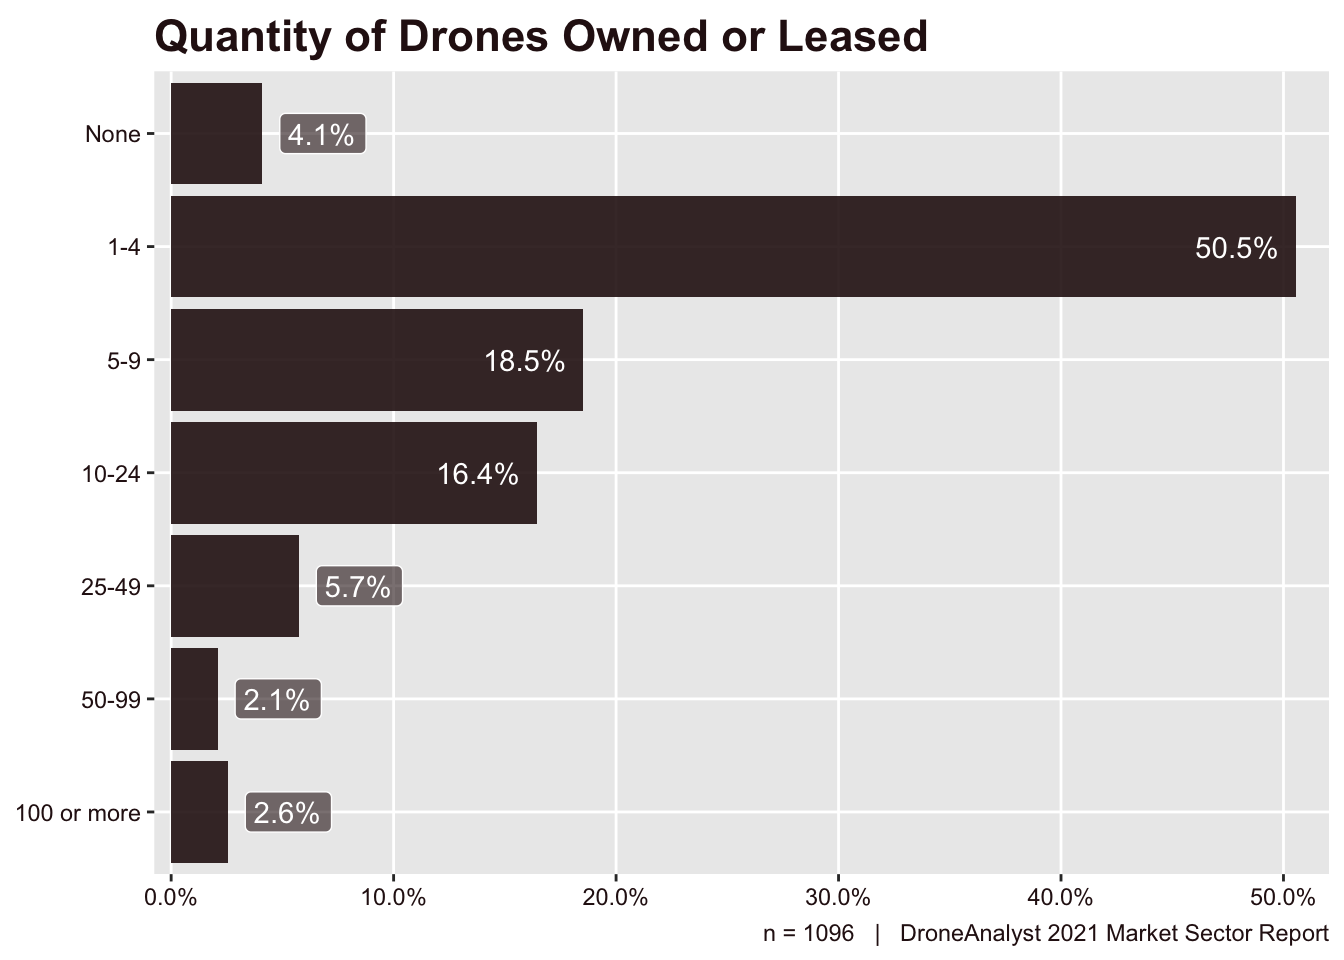 Quantity of Drones Owned or Leased